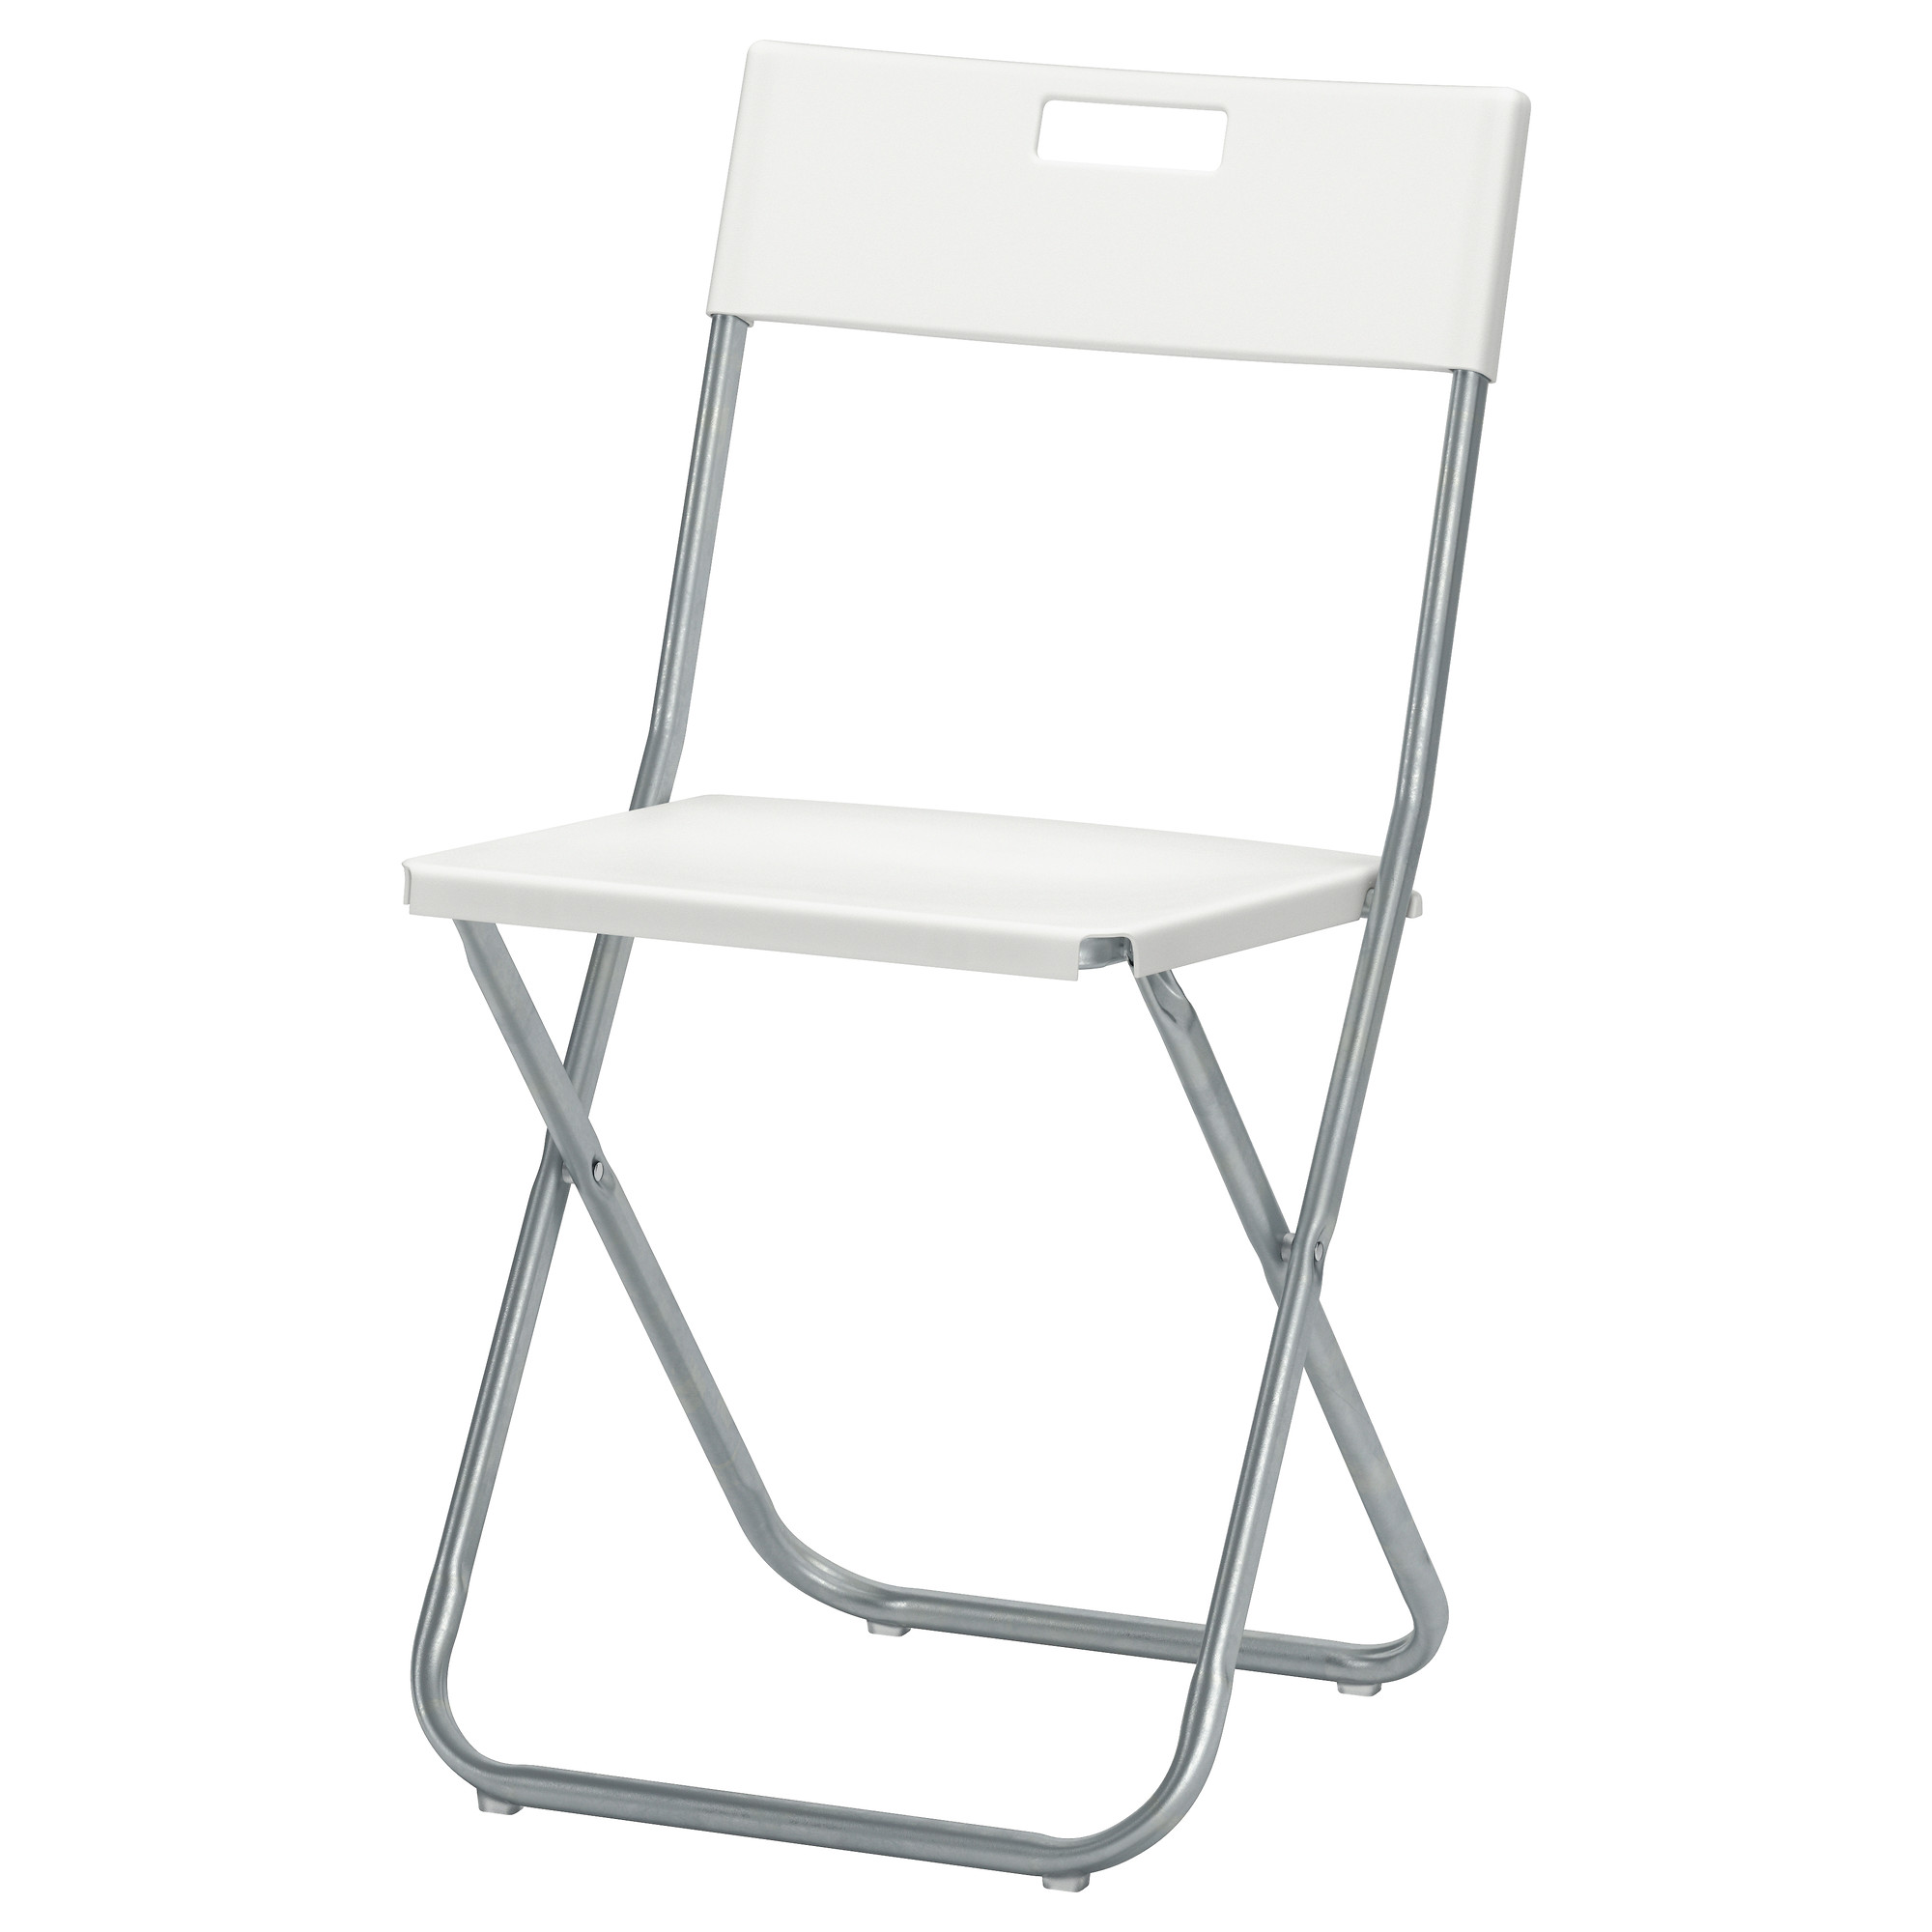 Folding Chairs Black Friday Deals